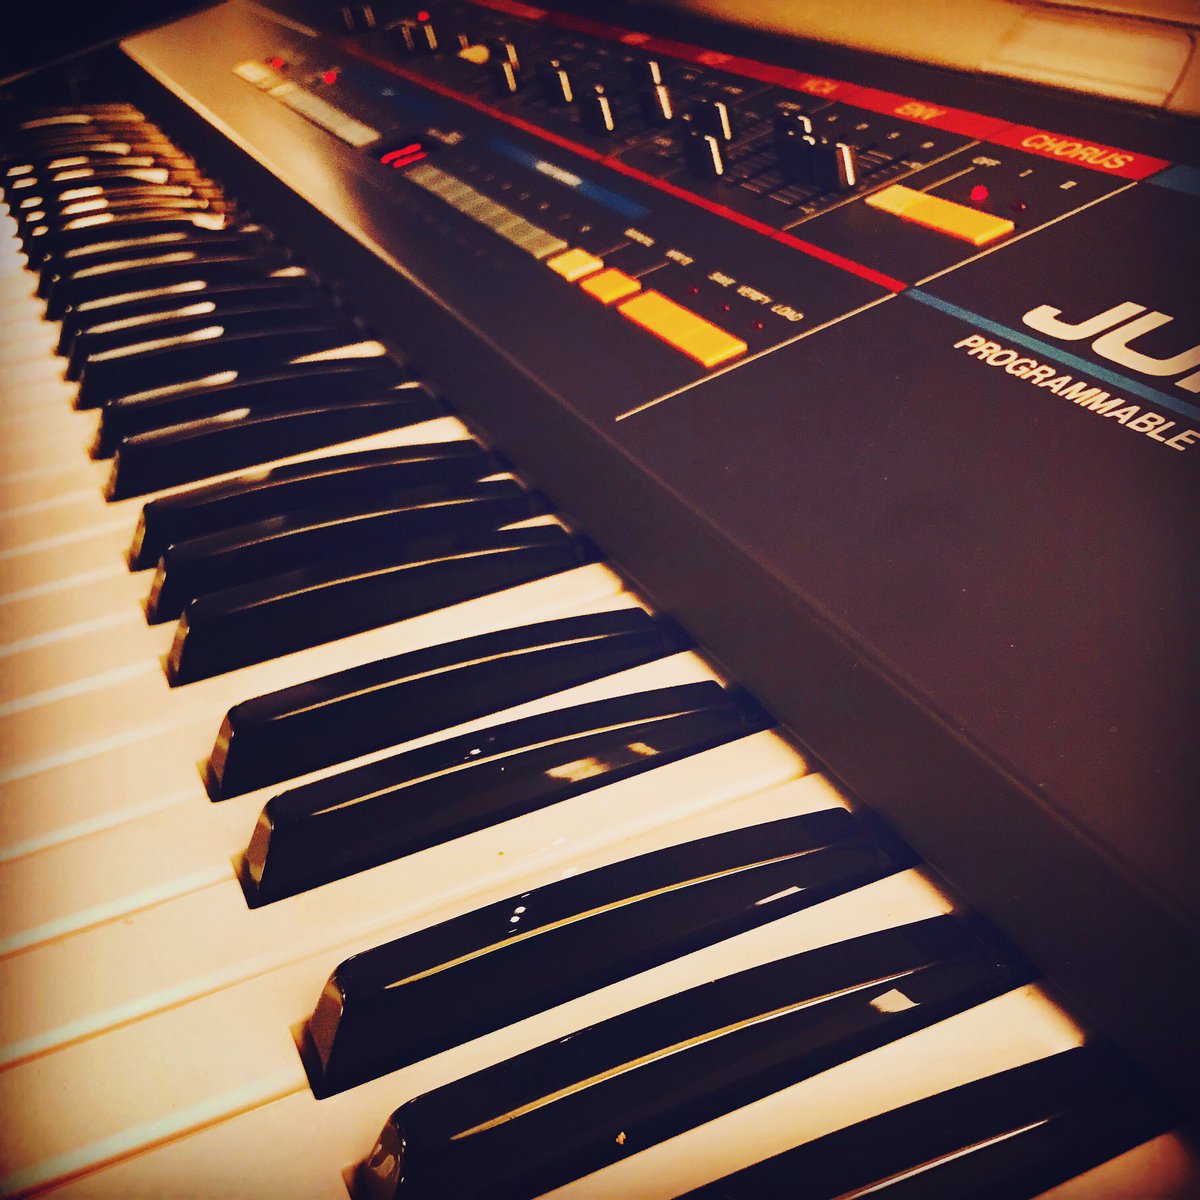 Another one of my favorite keyboards!!  I used it all over my new record.  I present the Classic Juno 106 
#musicianlife #music #studio #christuttle #tuttlemusic #piano #rolandjuno #indieartists #newmusic #producer #electronicmusic #edm #downtempo #ambientpiano #neoclassical